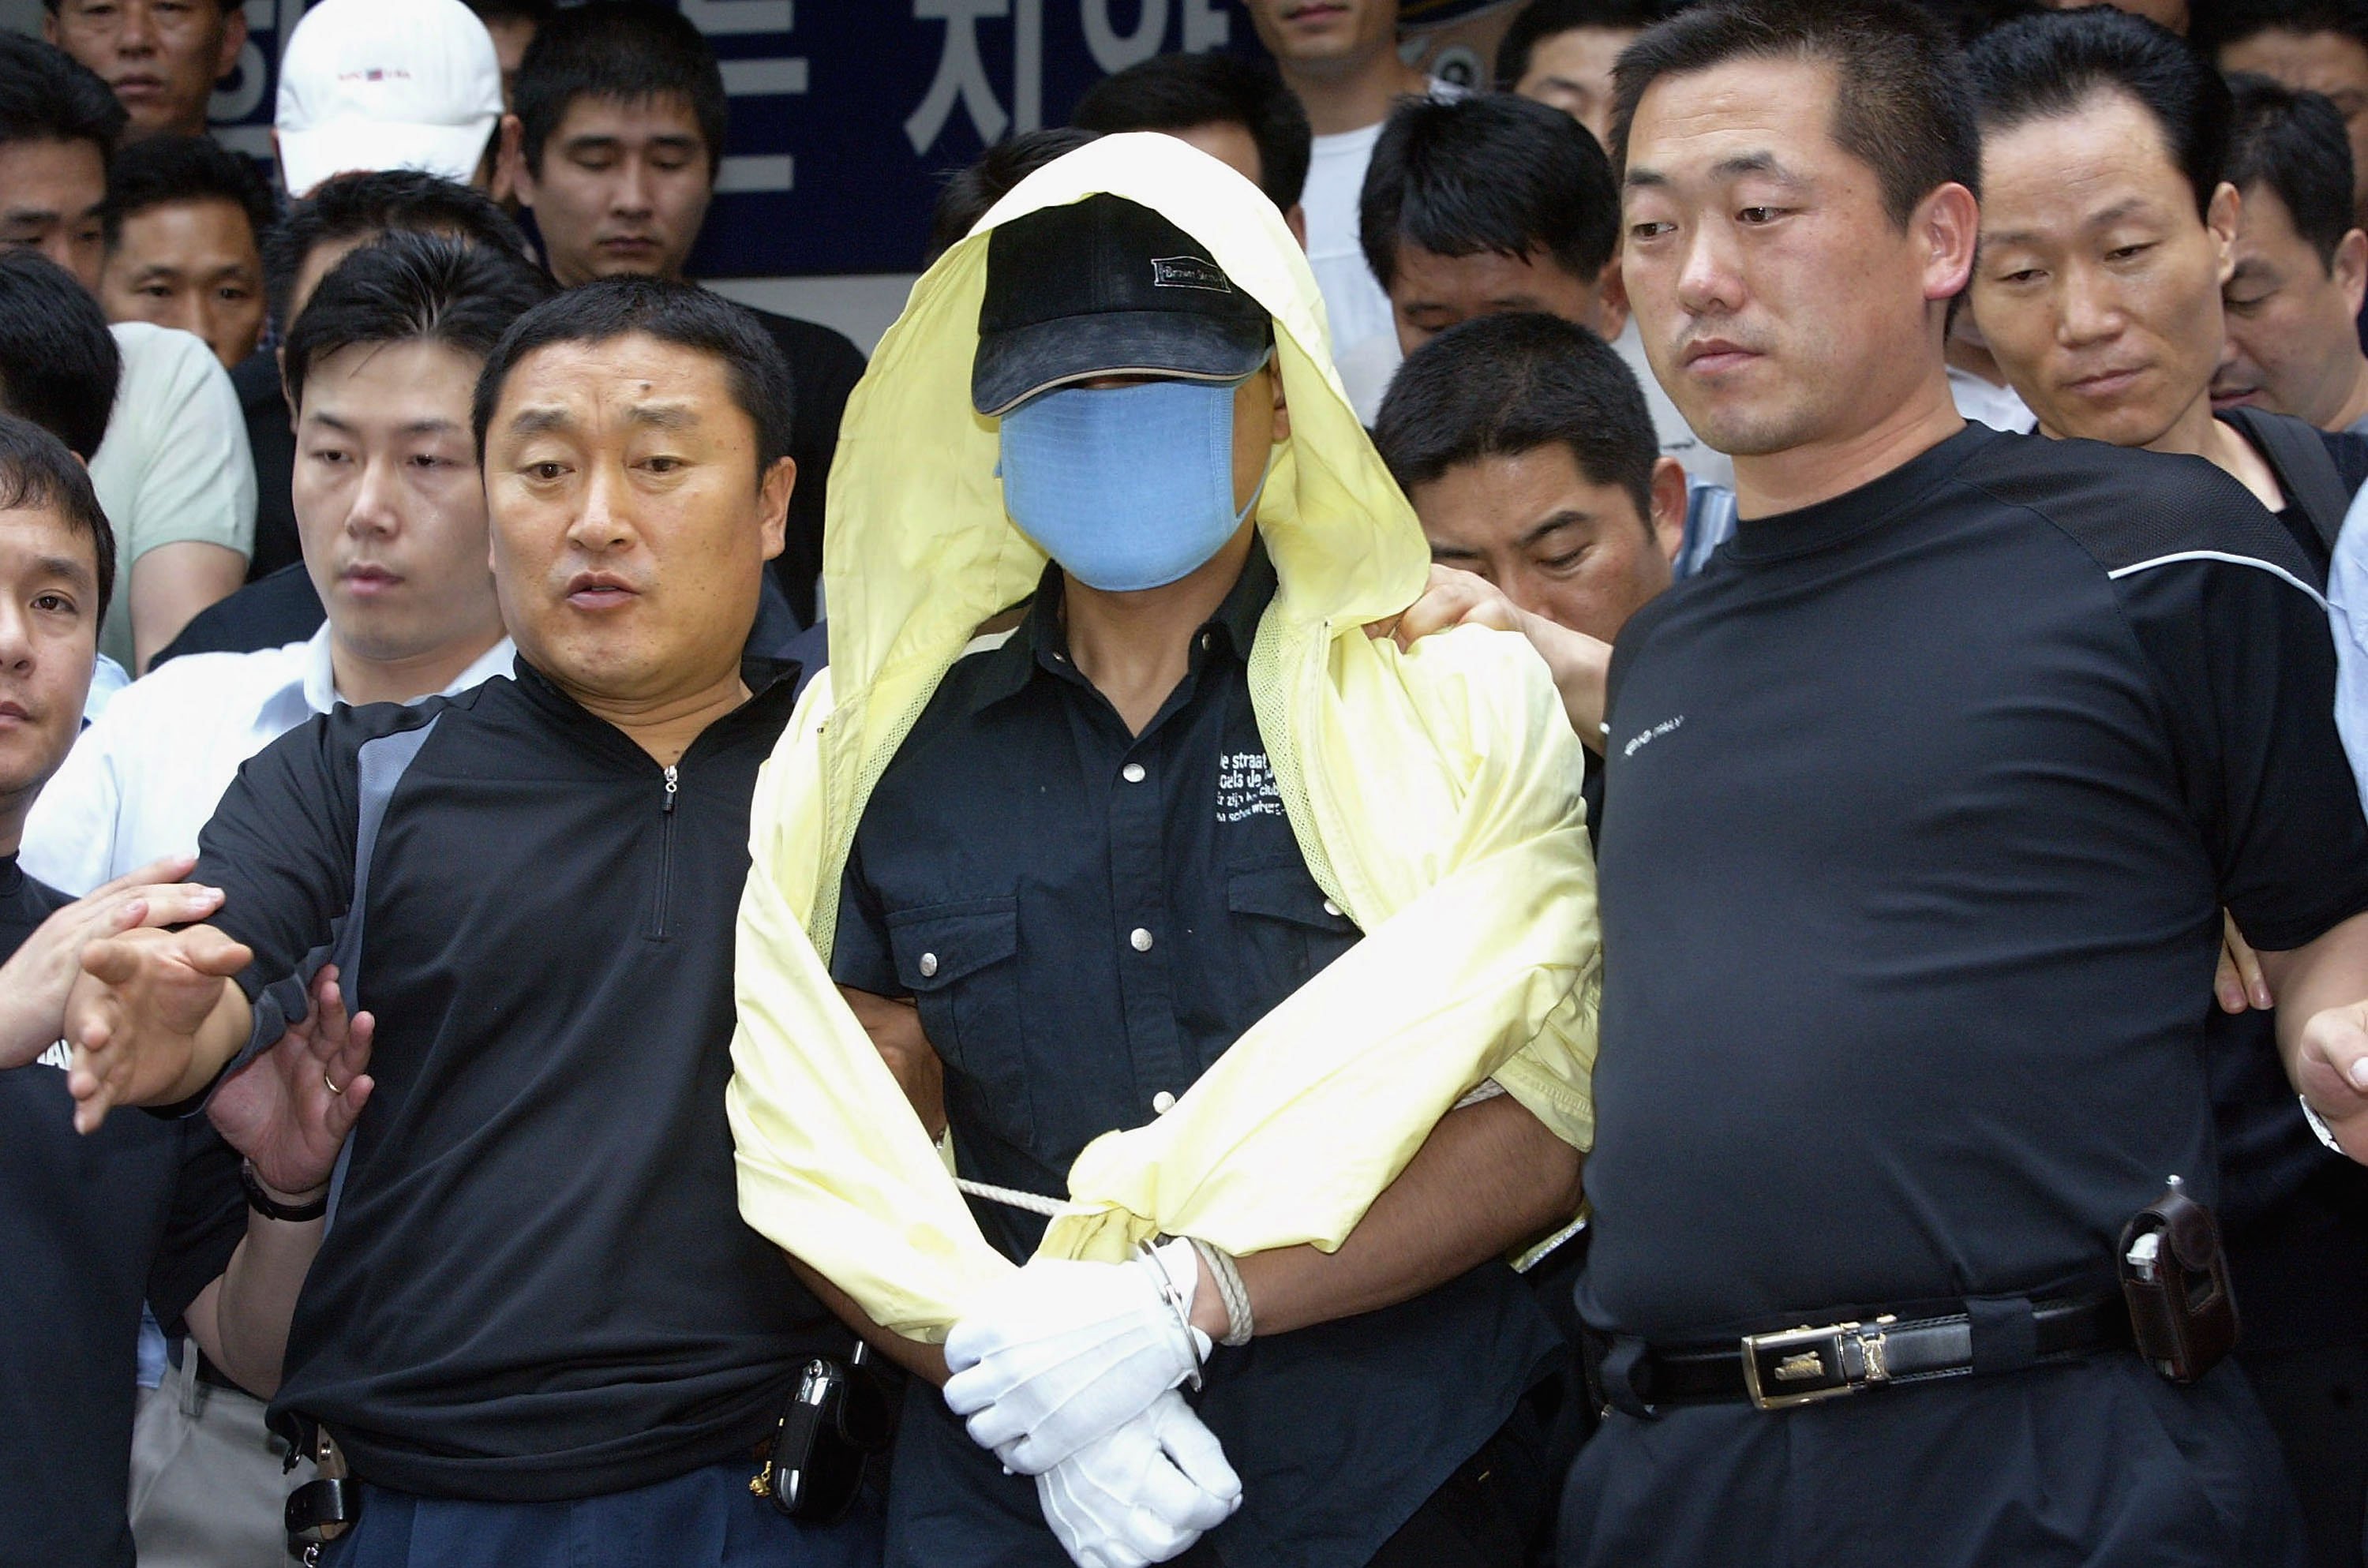 Killer Yoo Young-chul from 'The Raincoat Killer: Chasing a Predator in Korea' surrounded by police wearing yellow raincoat